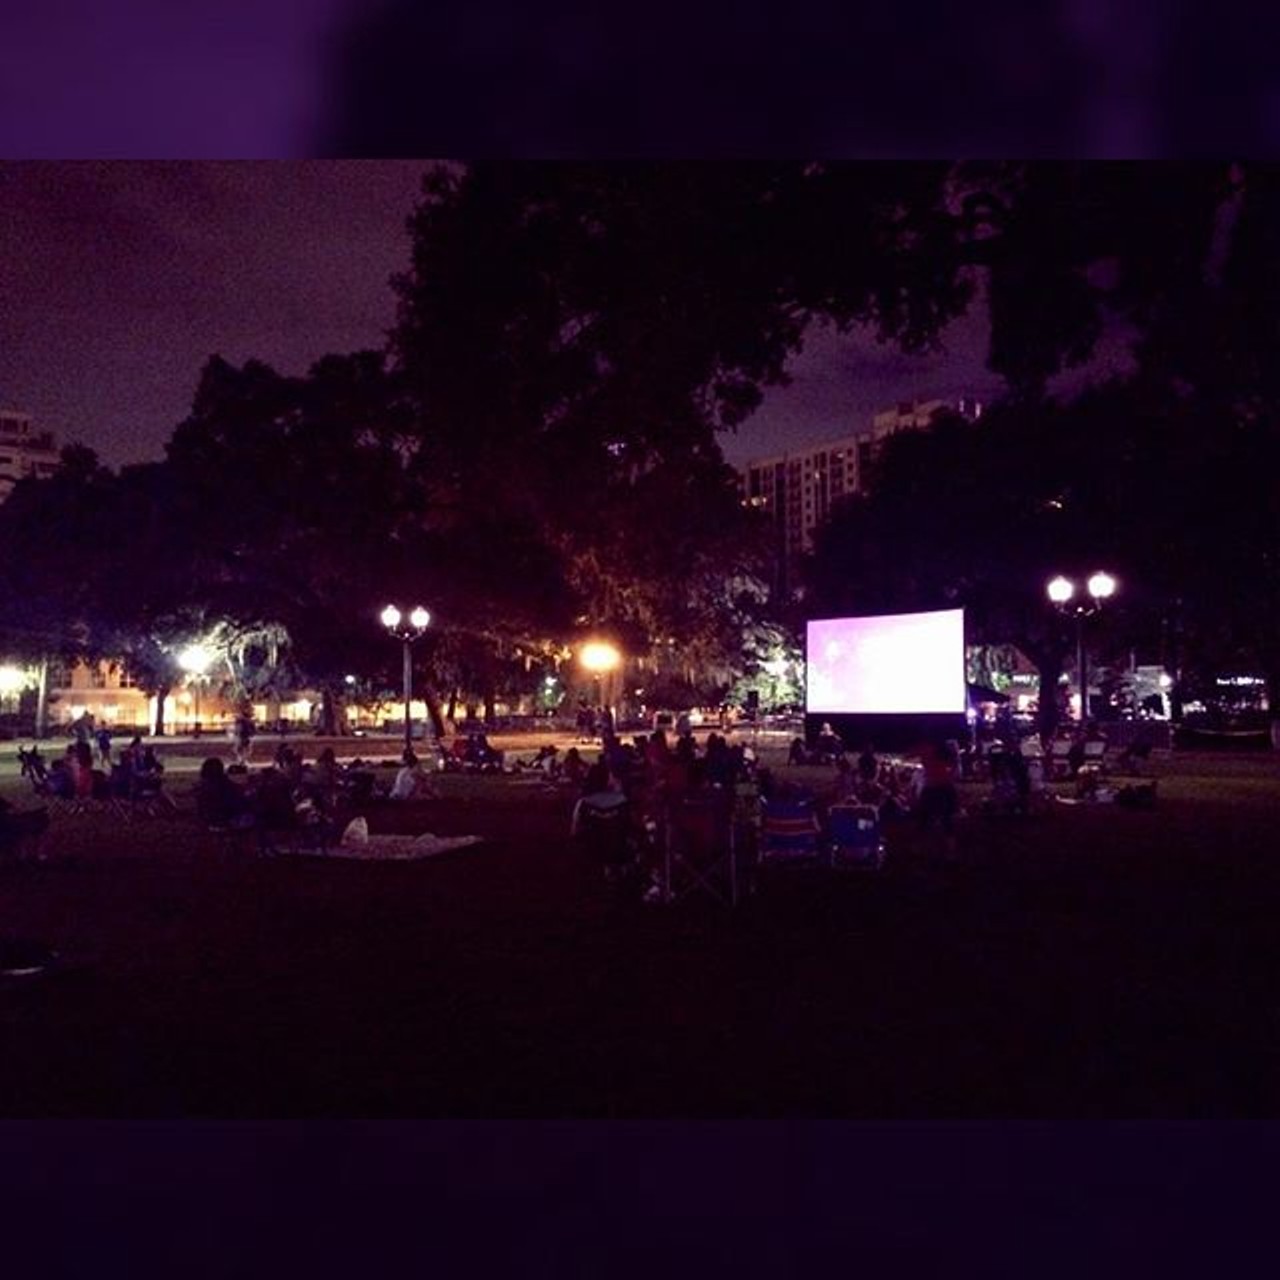 Flask it at Movieola at Lake Eola
512 East Washington Street (407) 246-2121,
You&#146;ll have to brown bag it (or use your trusty flask), but grab your drink of choice and head to Lake Eola for their monthly movie screening. It takes place the last Friday of every month, and it won&#146;t cost you a dime. June&#146;s movie is Cinderella, and July&#146;s is Jurassic World. 
Photo via jaromyre/Instagram